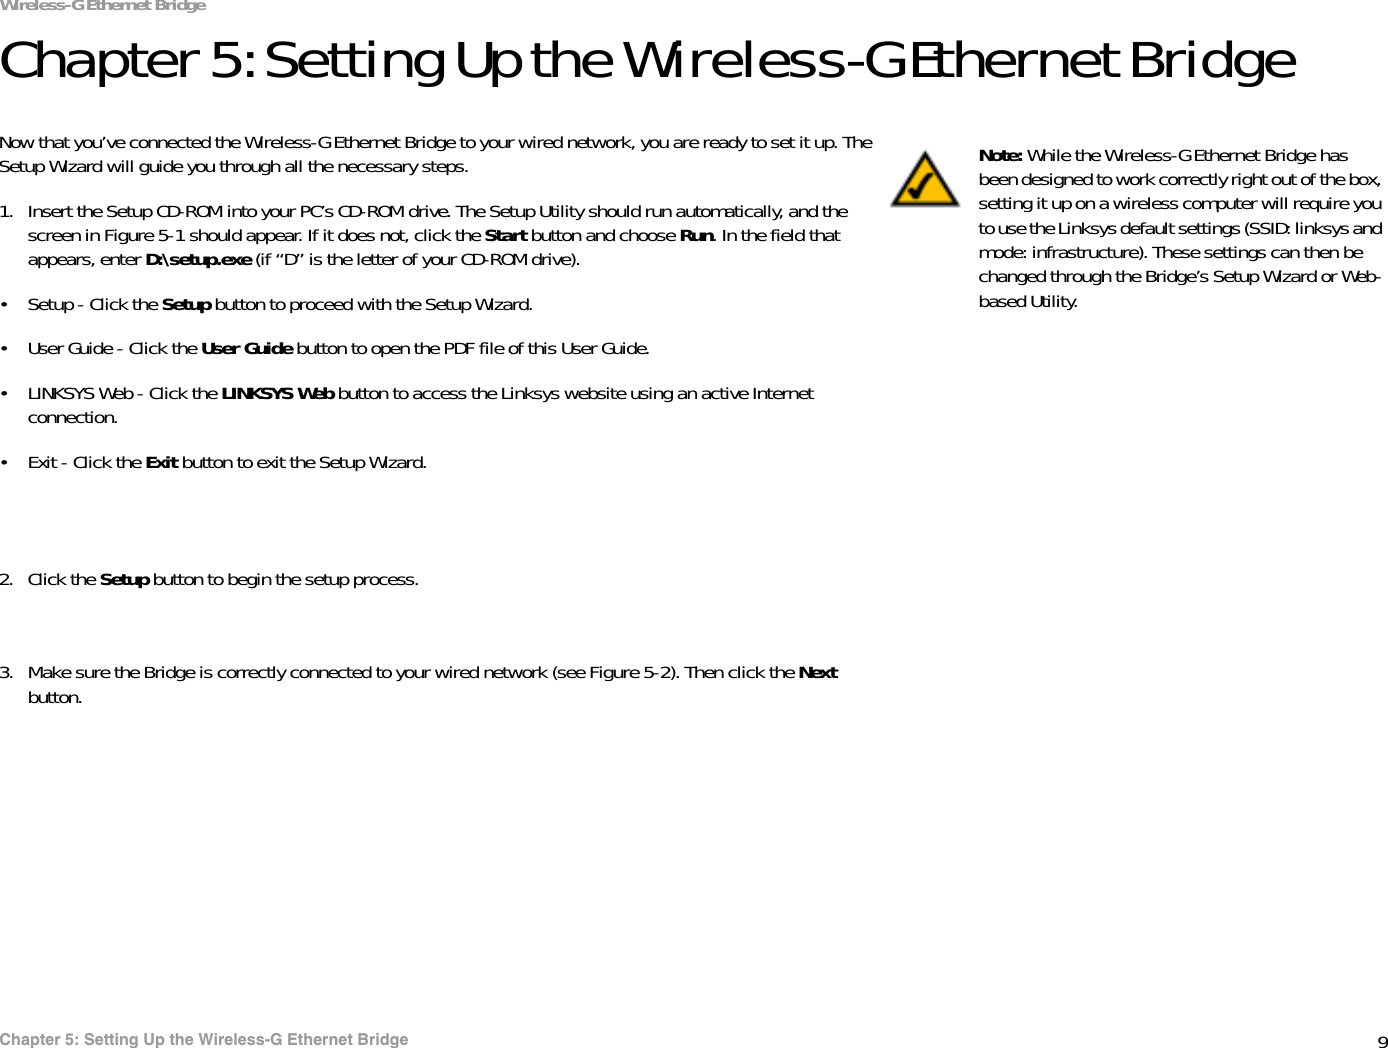 9Chapter 5: Setting Up the Wireless-G Ethernet BridgeWireless-G Ethernet BridgeChapter 5: Setting Up the Wireless-G Ethernet BridgeNow that you’ve connected the Wireless-G Ethernet Bridge to your wired network, you are ready to set it up. The Setup Wizard will guide you through all the necessary steps. 1. Insert the Setup CD-ROM into your PC’s CD-ROM drive. The Setup Utility should run automatically, and the screen in Figure 5-1 should appear. If it does not, click the Start button and choose Run. In the field that appears, enter D:\setup.exe (if “D” is the letter of your CD-ROM drive).• Setup - Click the Setup button to proceed with the Setup Wizard. • User Guide - Click the User Guide button to open the PDF file of this User Guide. • LINKSYS Web - Click the LINKSYS Web button to access the Linksys website using an active Internet connection.• Exit - Click the Exit button to exit the Setup Wizard.2. Click the Setup button to begin the setup process.3. Make sure the Bridge is correctly connected to your wired network (see Figure 5-2). Then click the Next button.Note: While the Wireless-G Ethernet Bridge has been designed to work correctly right out of the box, setting it up on a wireless computer will require you to use the Linksys default settings (SSID: linksys and mode: infrastructure). These settings can then be changed through the Bridge’s Setup Wizard or Web-based Utility.